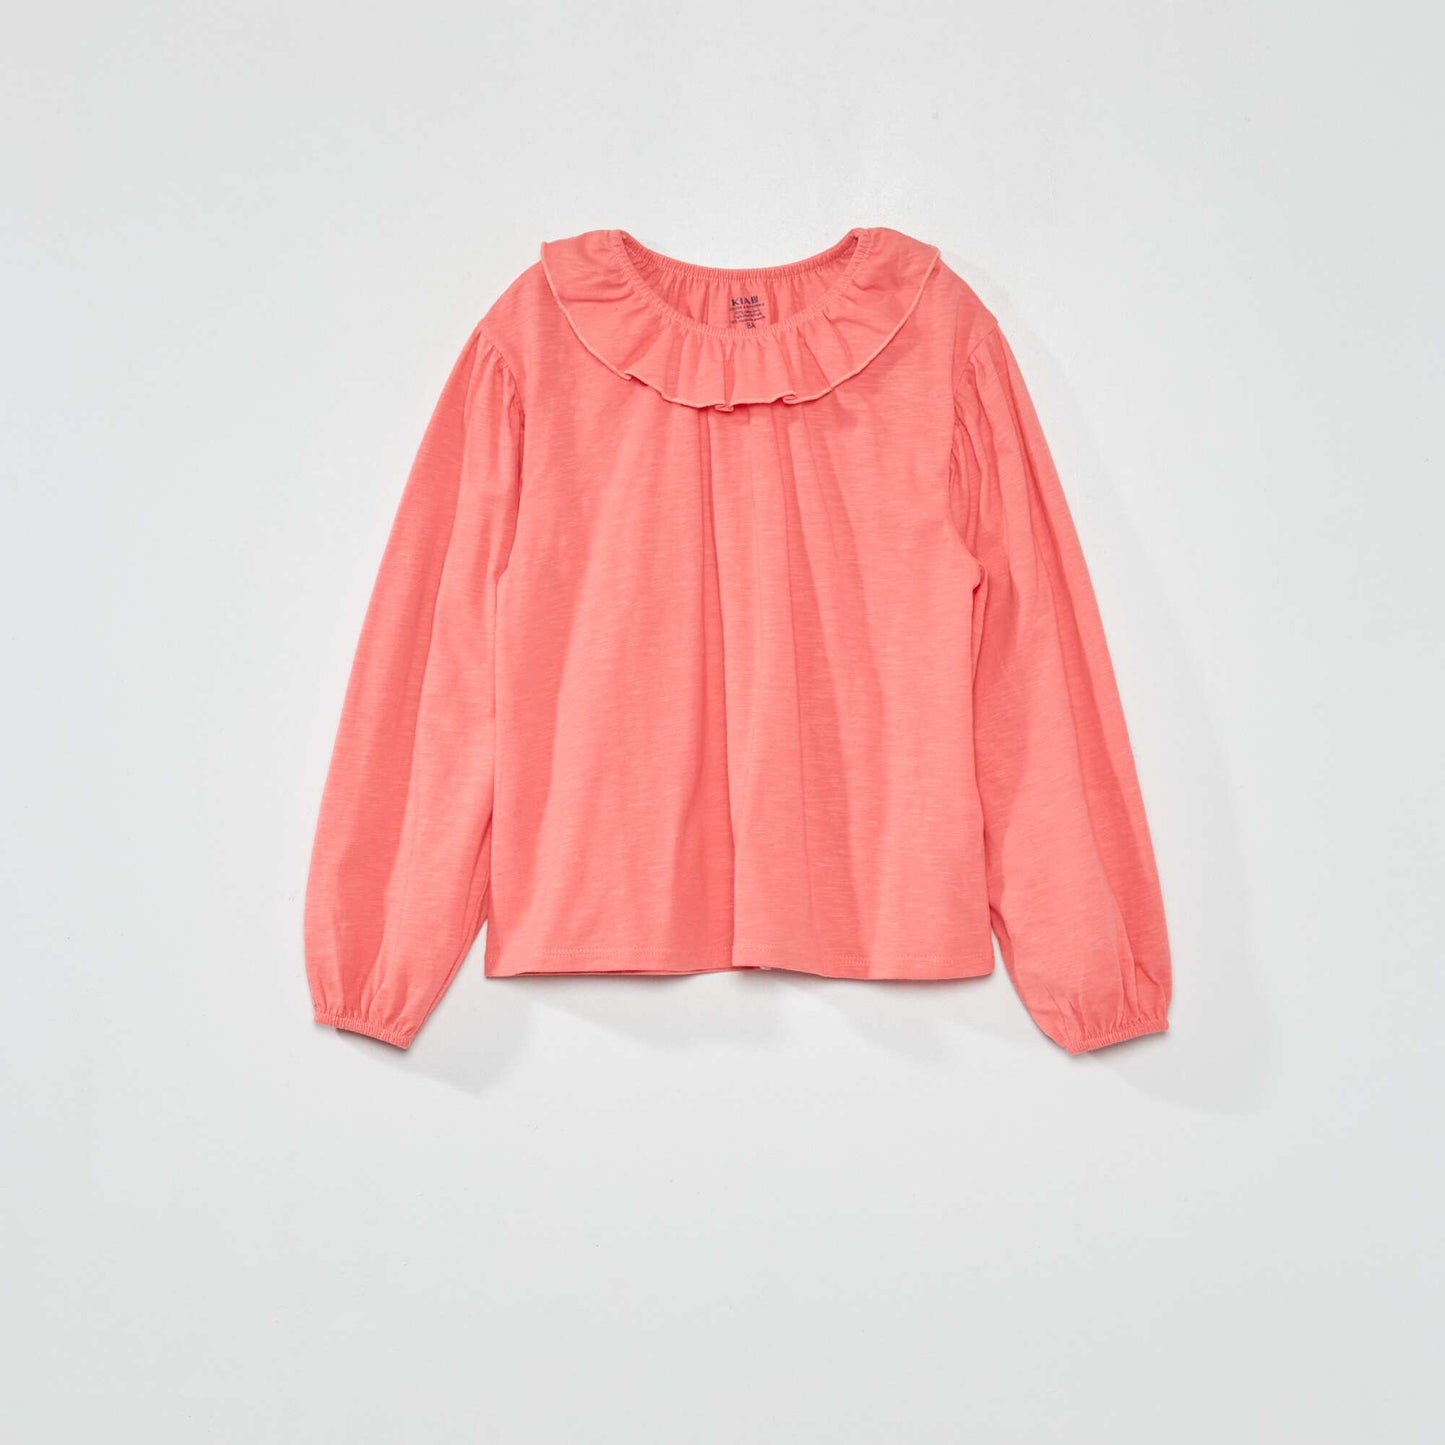 T-shirt with little ruffled collar pink